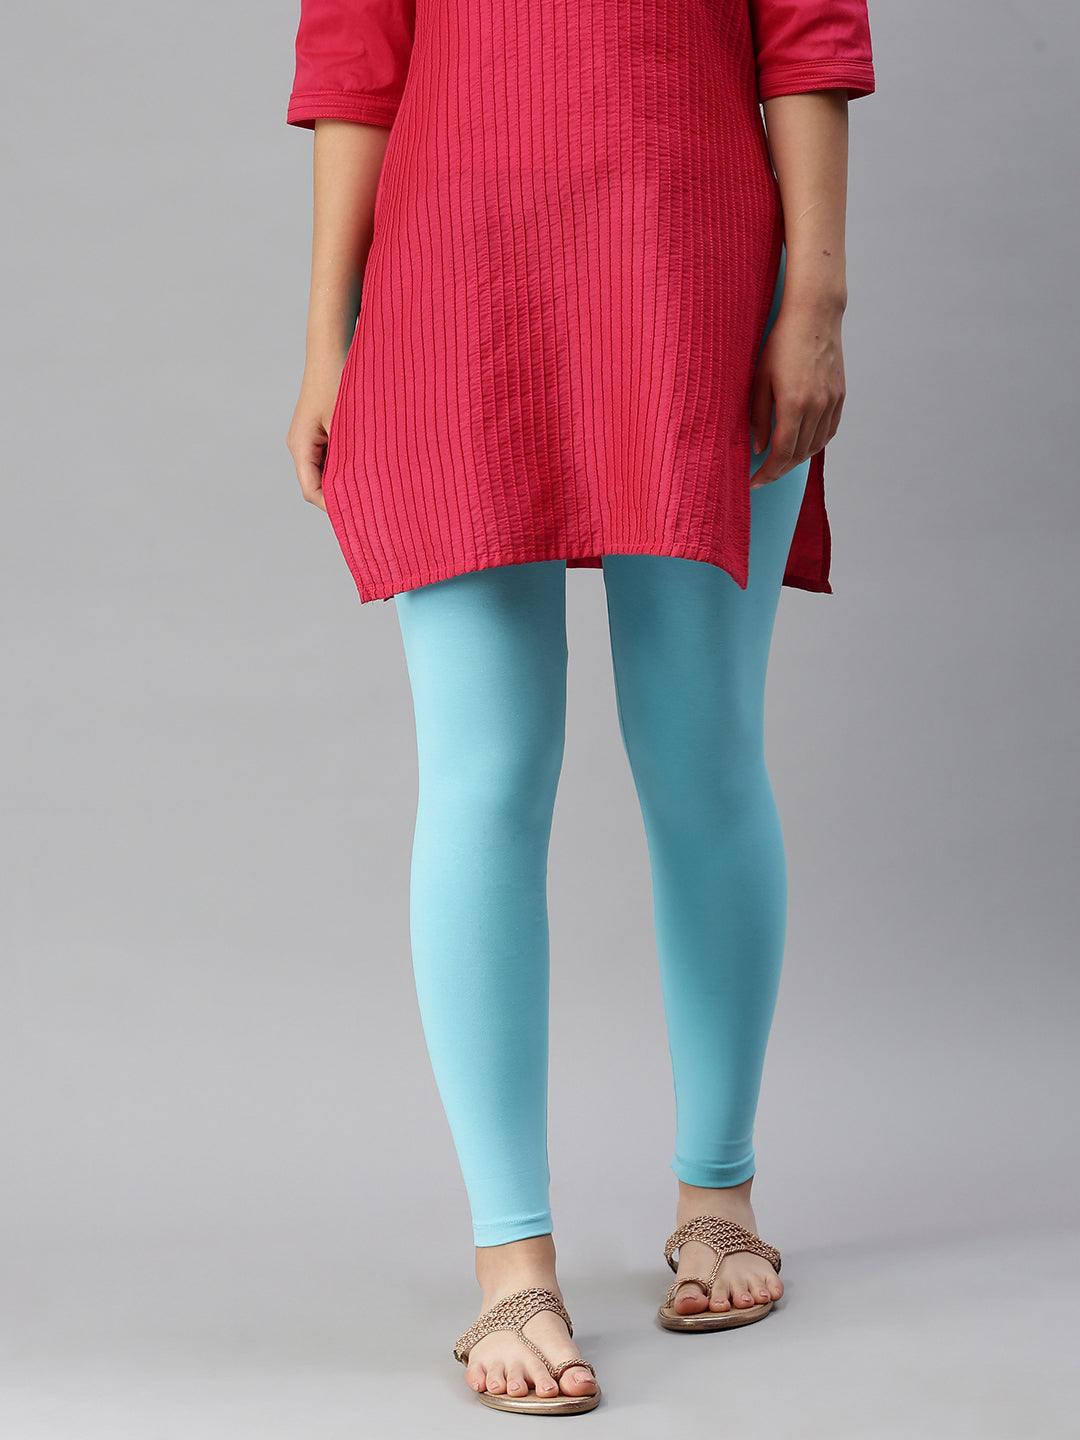 Buy Red Leggings for Women by Go Colors Online | Ajio.com